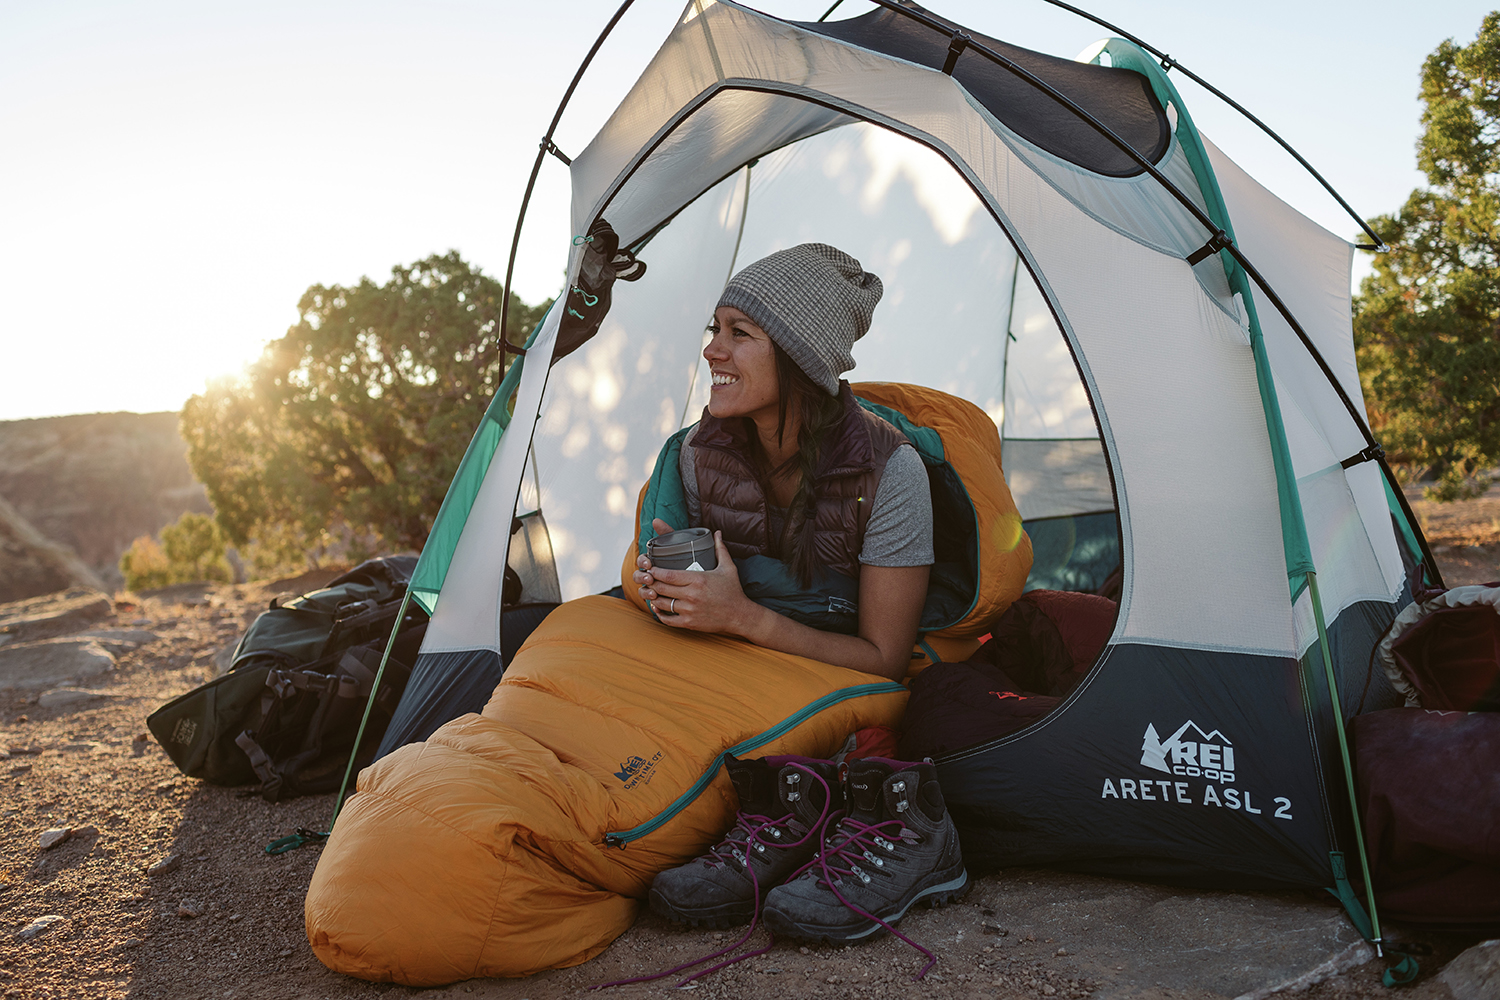 Can You Rent Camping Gear From Rei? - PostureInfoHub